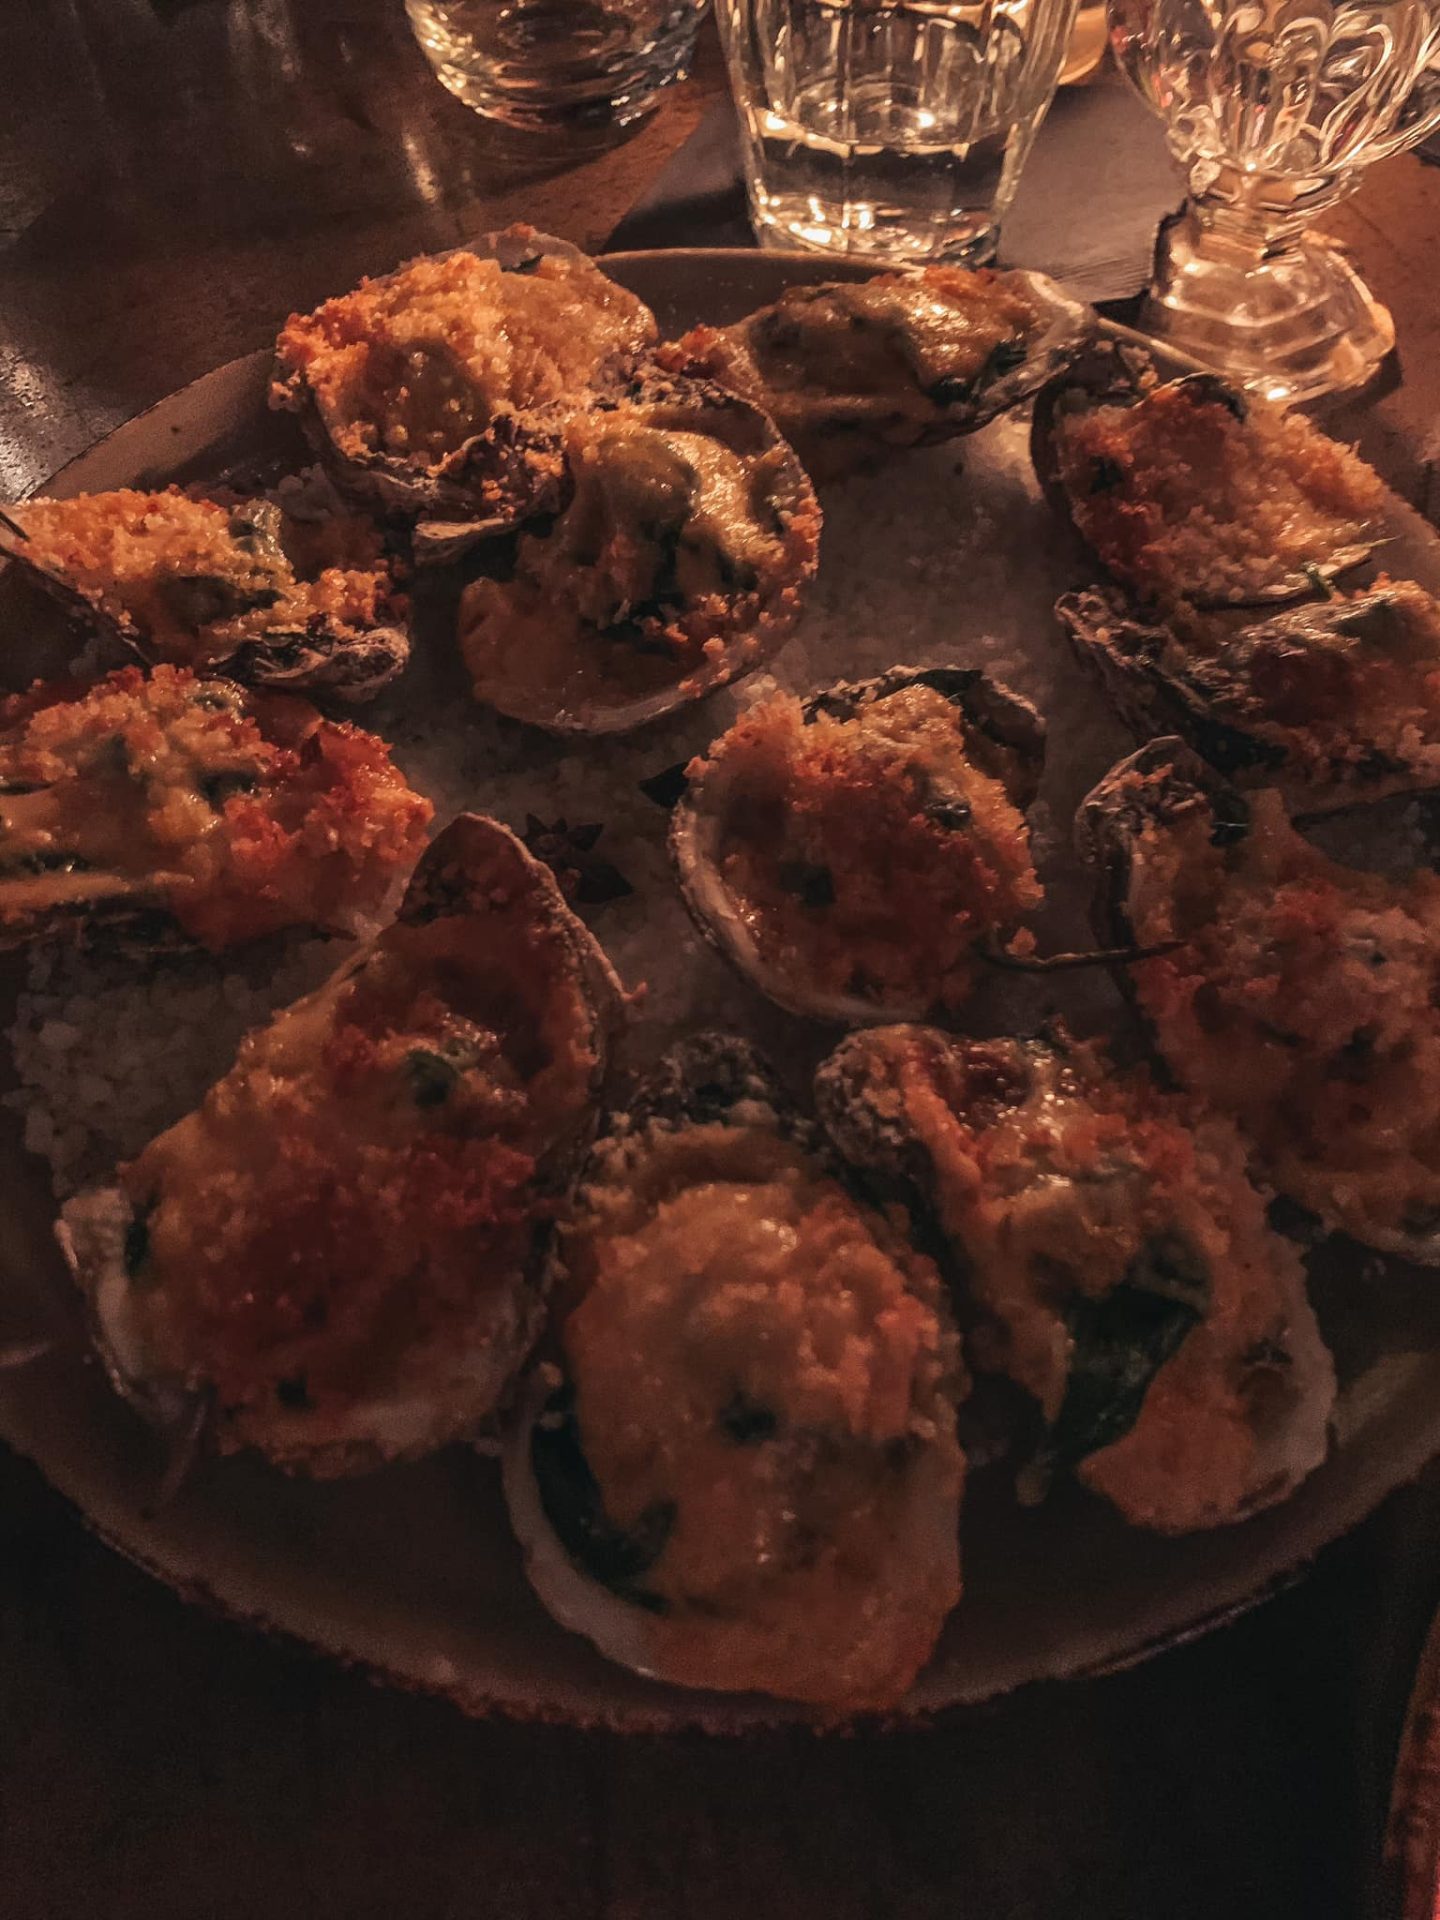 Grilled oysters from Gin Joint in Tampa